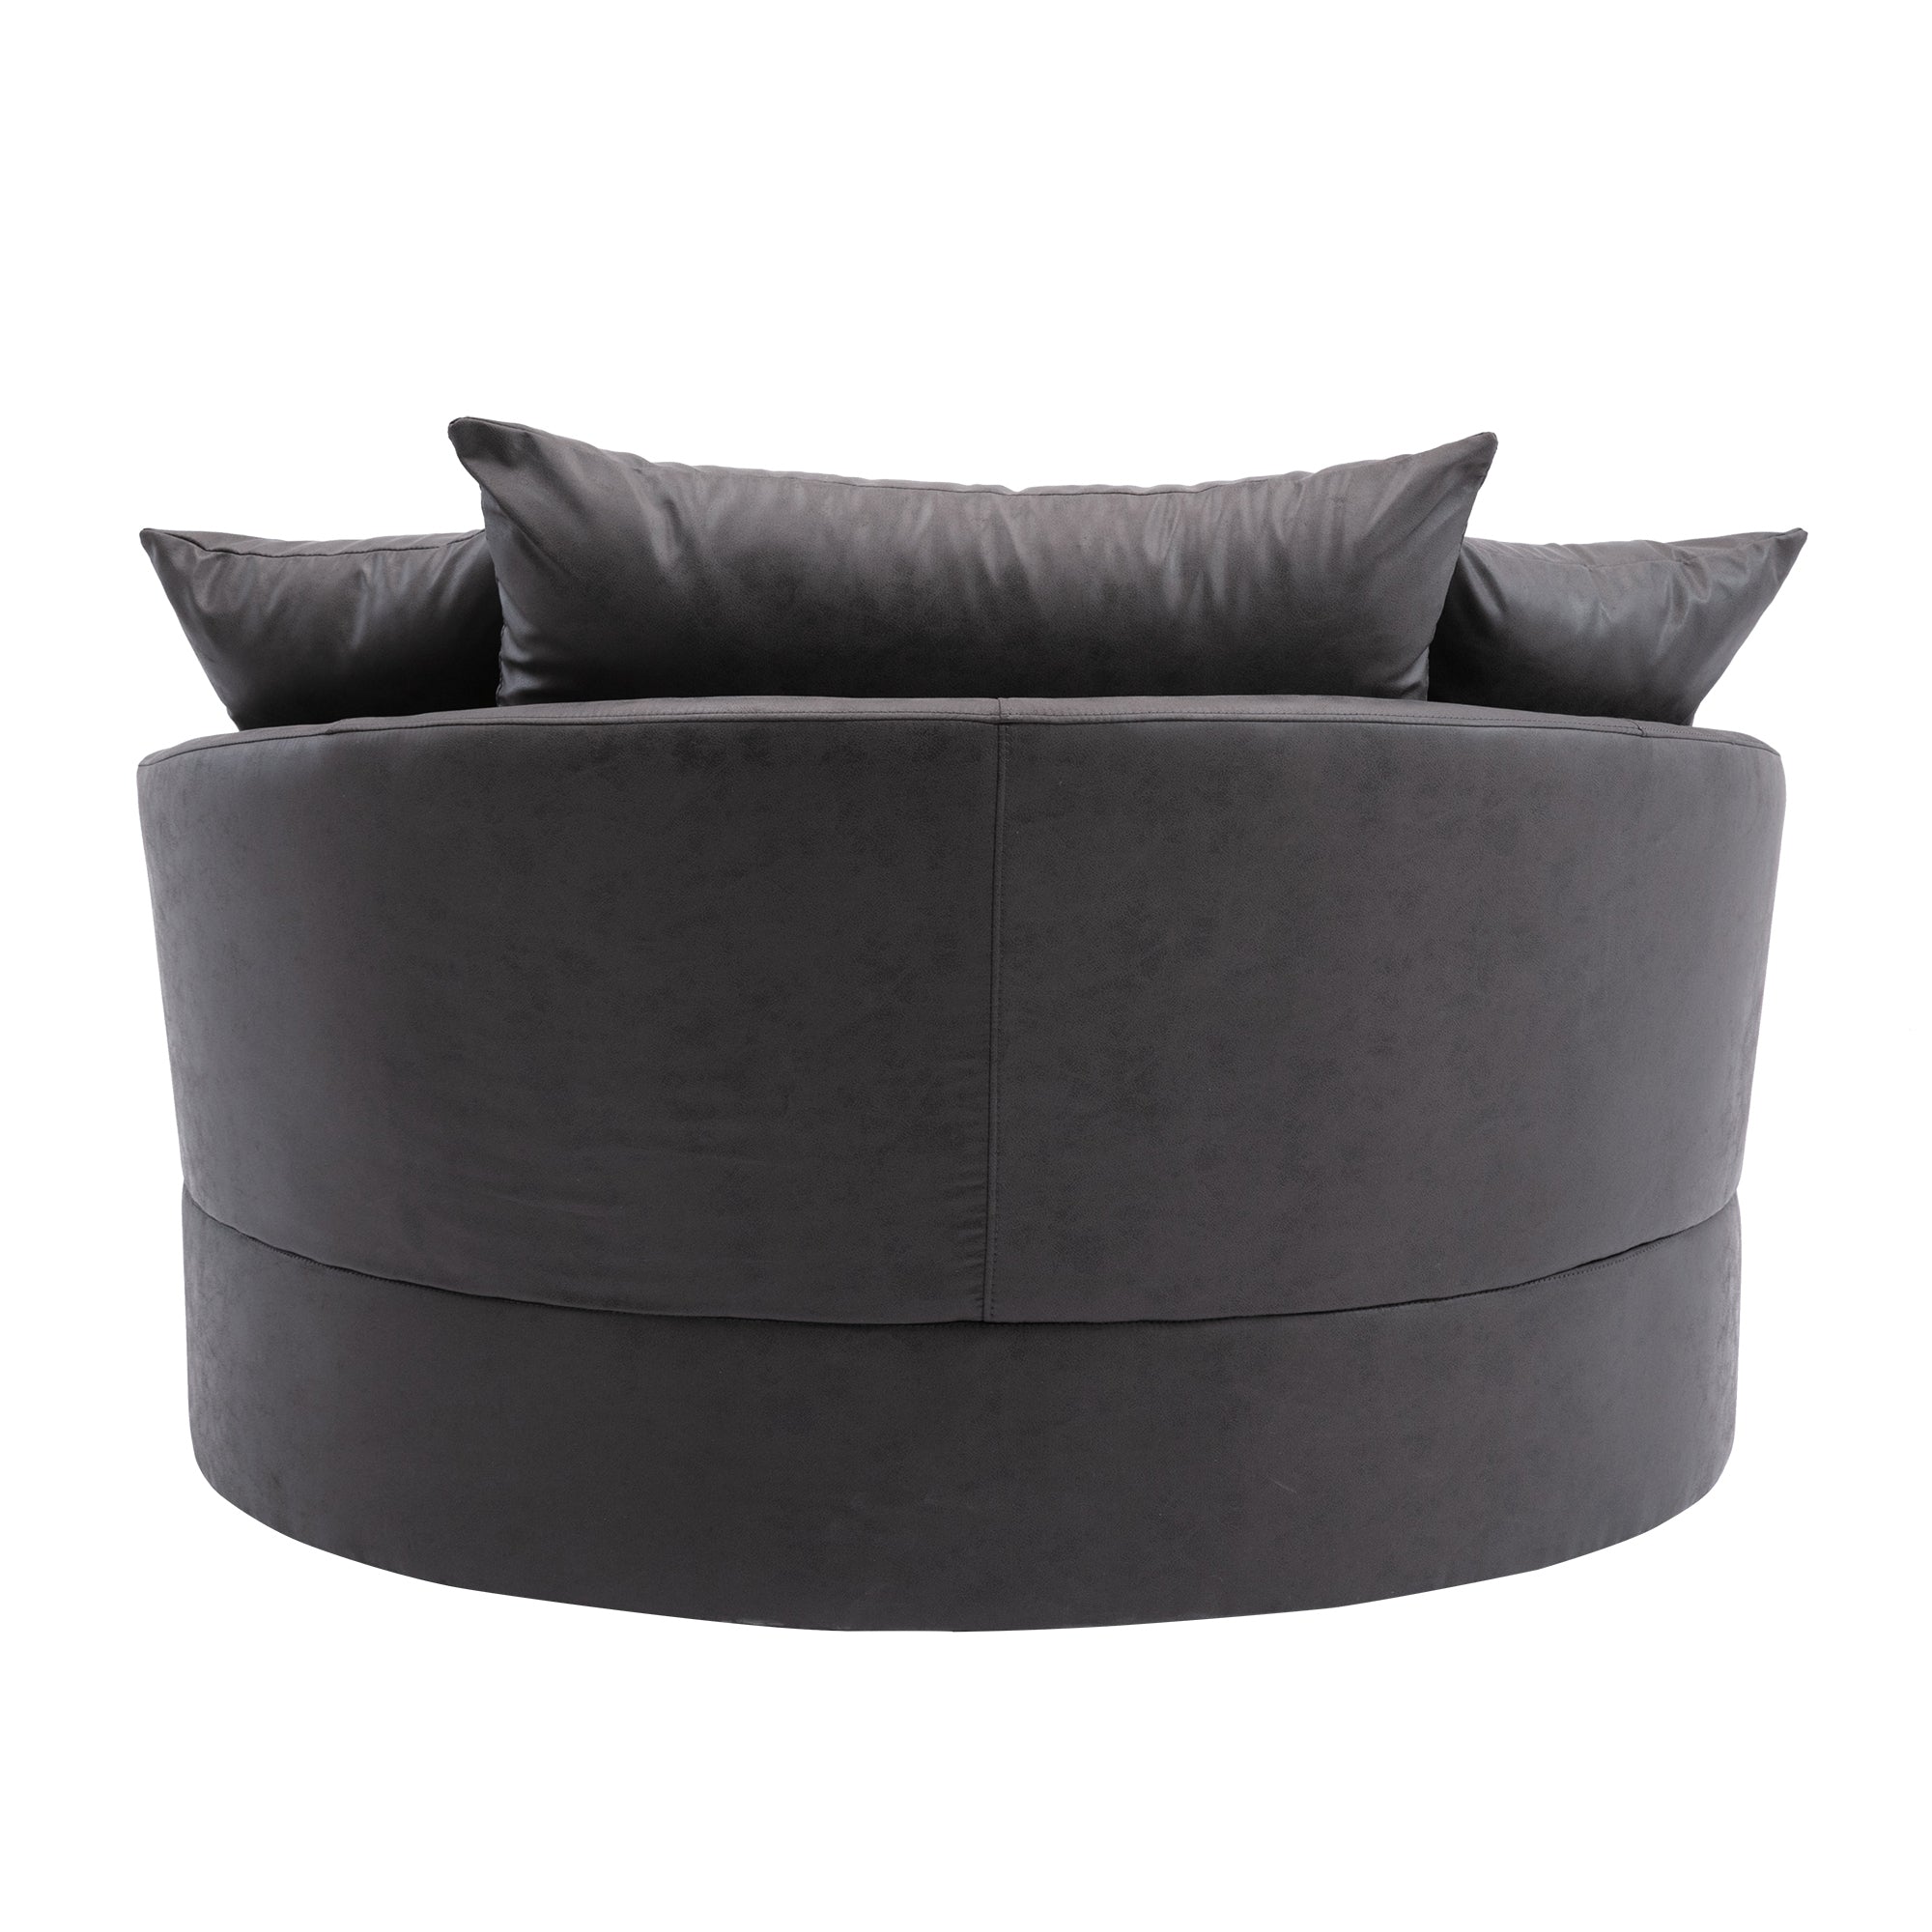 Modern Akili swivel accent chair for hotel living room.